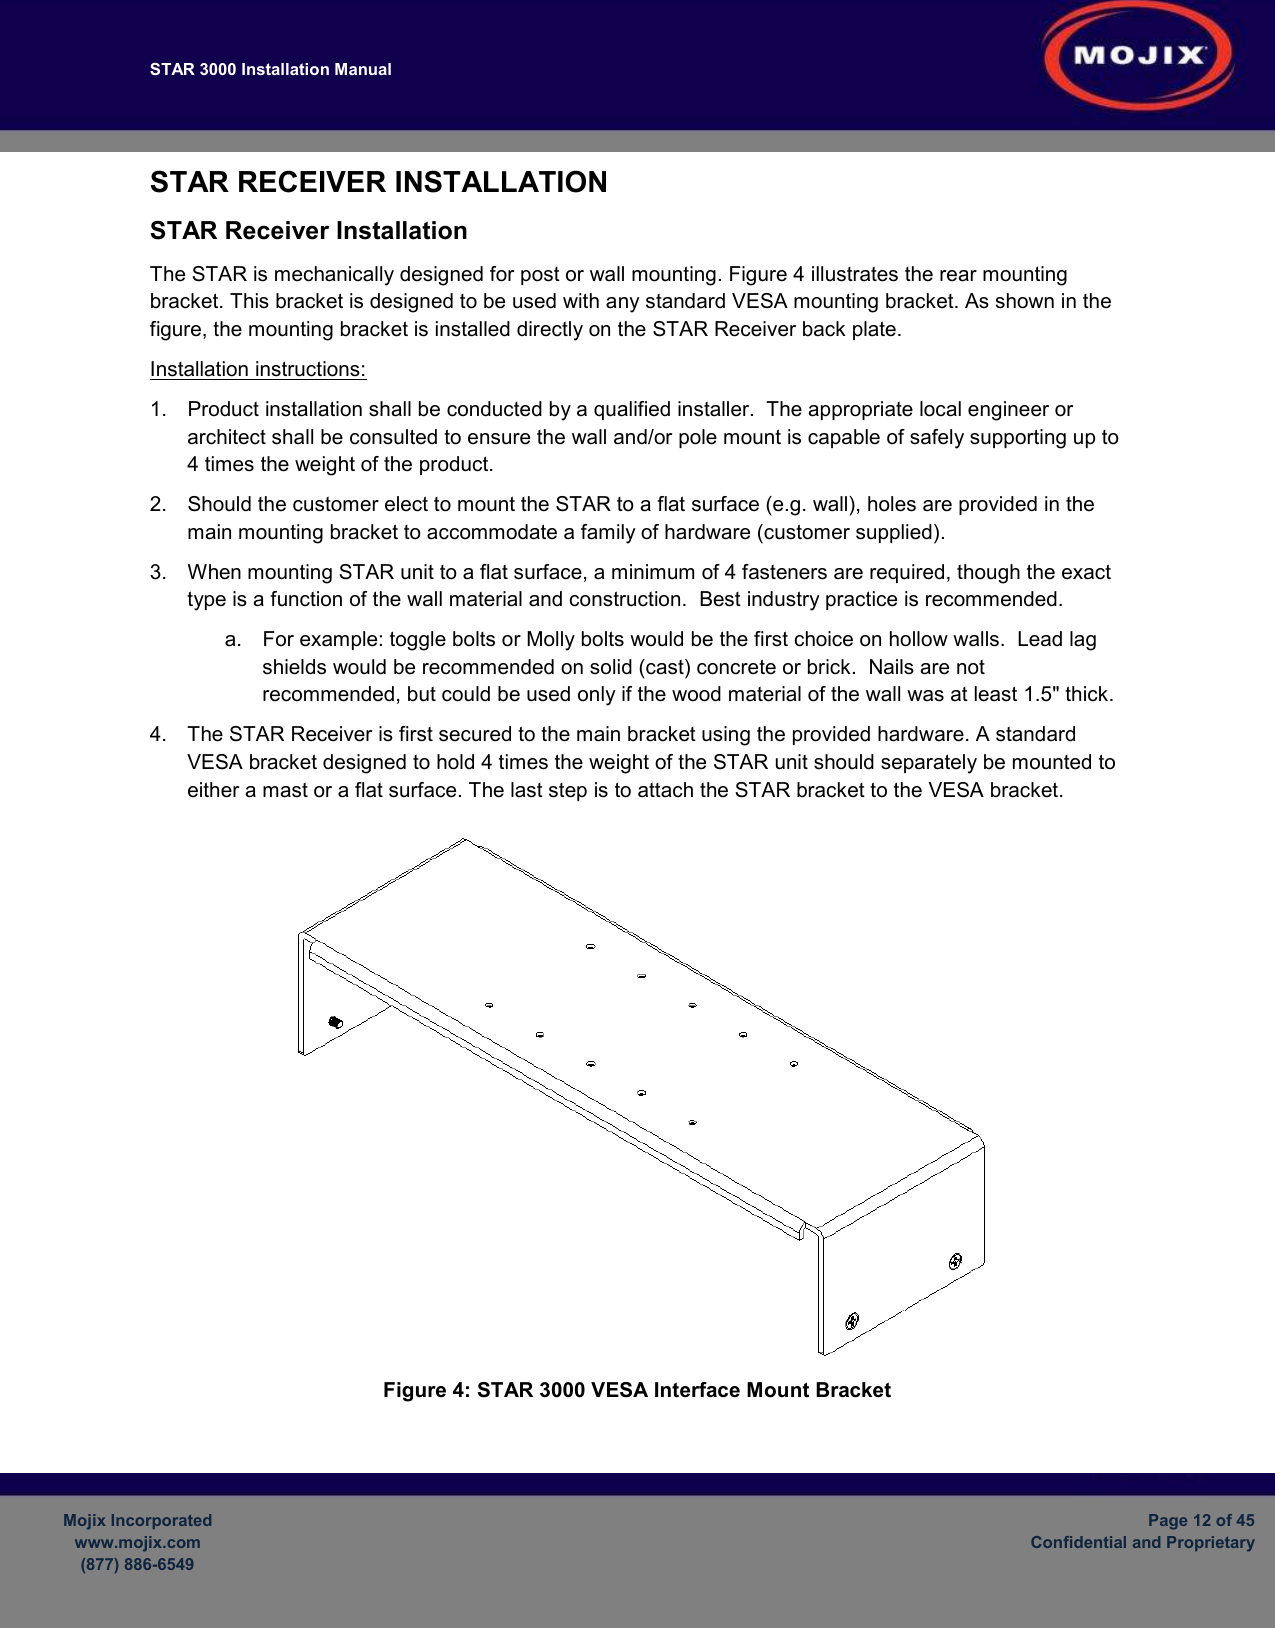 STAR 3000 Installation Manual         Mojix Incorporated www.mojix.com (877) 886-6549  Page 12 of 45 Confidential and Proprietary  STAR RECEIVER INSTALLATION STAR Receiver Installation The STAR is mechanically designed for post or wall mounting. Figure 4 illustrates the rear mounting bracket. This bracket is designed to be used with any standard VESA mounting bracket. As shown in the figure, the mounting bracket is installed directly on the STAR Receiver back plate.  Installation instructions: 1.  Product installation shall be conducted by a qualified installer.  The appropriate local engineer or architect shall be consulted to ensure the wall and/or pole mount is capable of safely supporting up to 4 times the weight of the product. 2.  Should the customer elect to mount the STAR to a flat surface (e.g. wall), holes are provided in the main mounting bracket to accommodate a family of hardware (customer supplied).   3.  When mounting STAR unit to a flat surface, a minimum of 4 fasteners are required, though the exact type is a function of the wall material and construction.  Best industry practice is recommended.   a.  For example: toggle bolts or Molly bolts would be the first choice on hollow walls.  Lead lag shields would be recommended on solid (cast) concrete or brick.  Nails are not recommended, but could be used only if the wood material of the wall was at least 1.5&quot; thick. 4.  The STAR Receiver is first secured to the main bracket using the provided hardware. A standard VESA bracket designed to hold 4 times the weight of the STAR unit should separately be mounted to either a mast or a flat surface. The last step is to attach the STAR bracket to the VESA bracket.  Figure 4: STAR 3000 VESA Interface Mount Bracket  